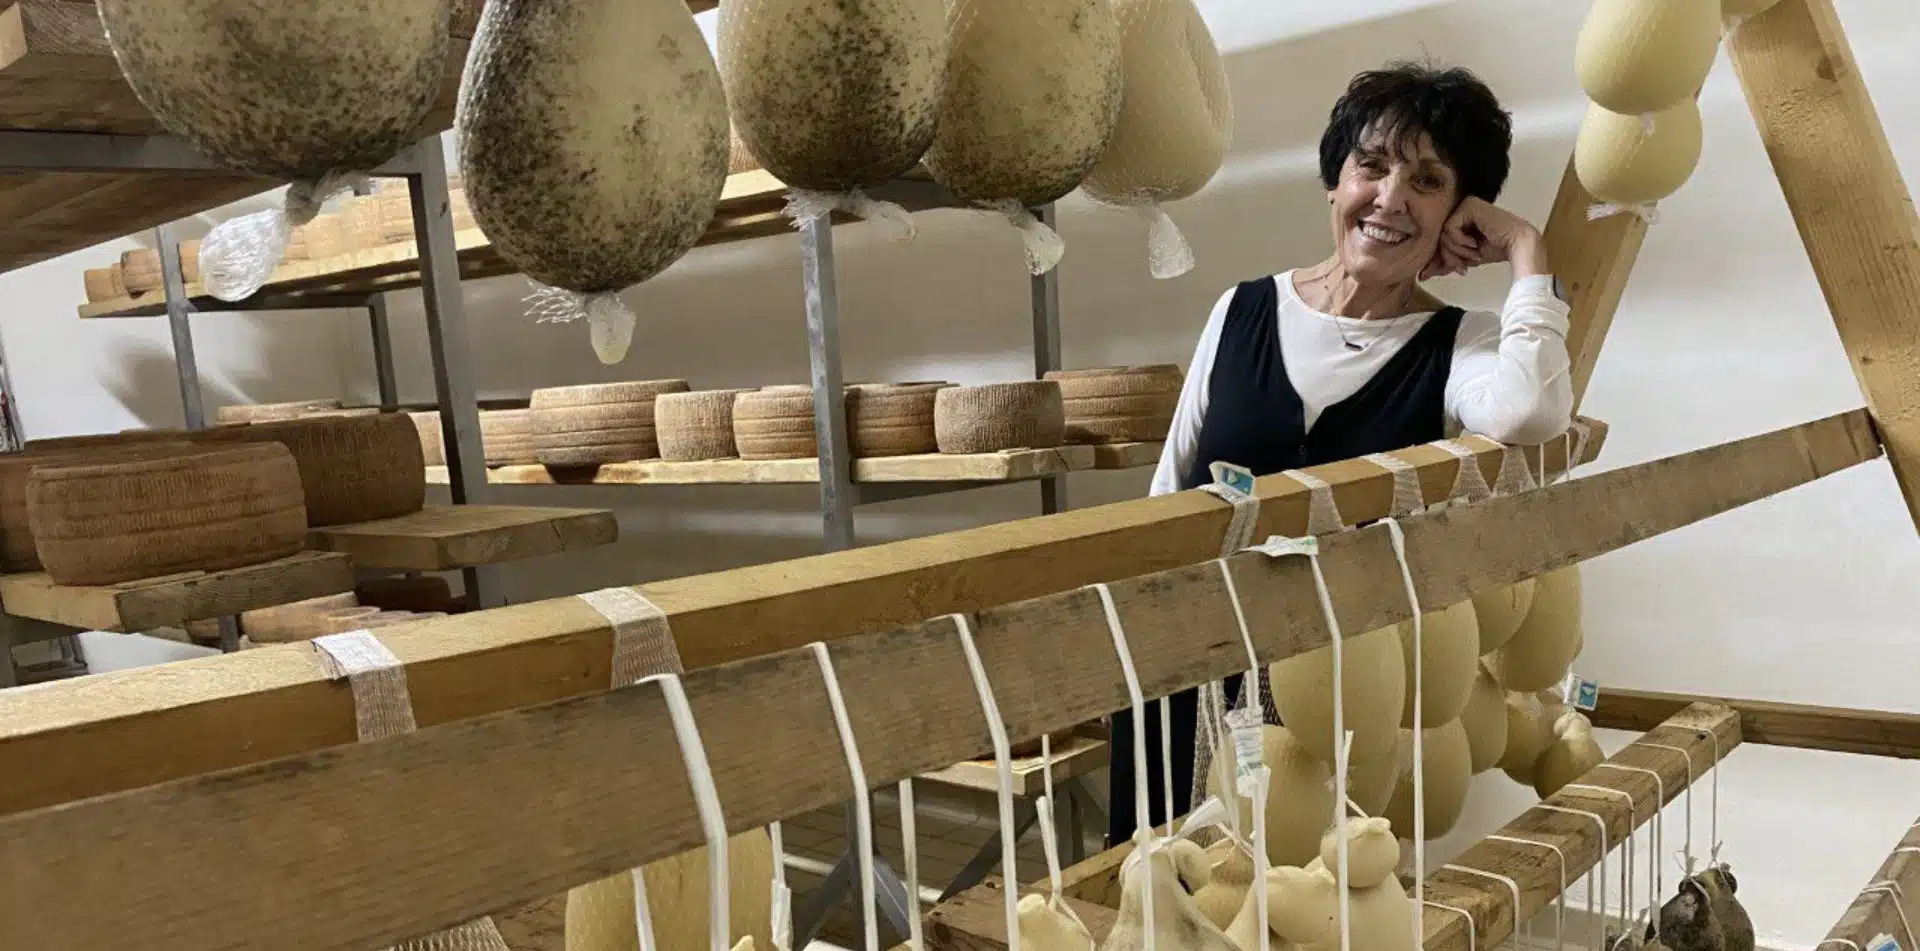 Sample local cheeses in Puglia, Italy